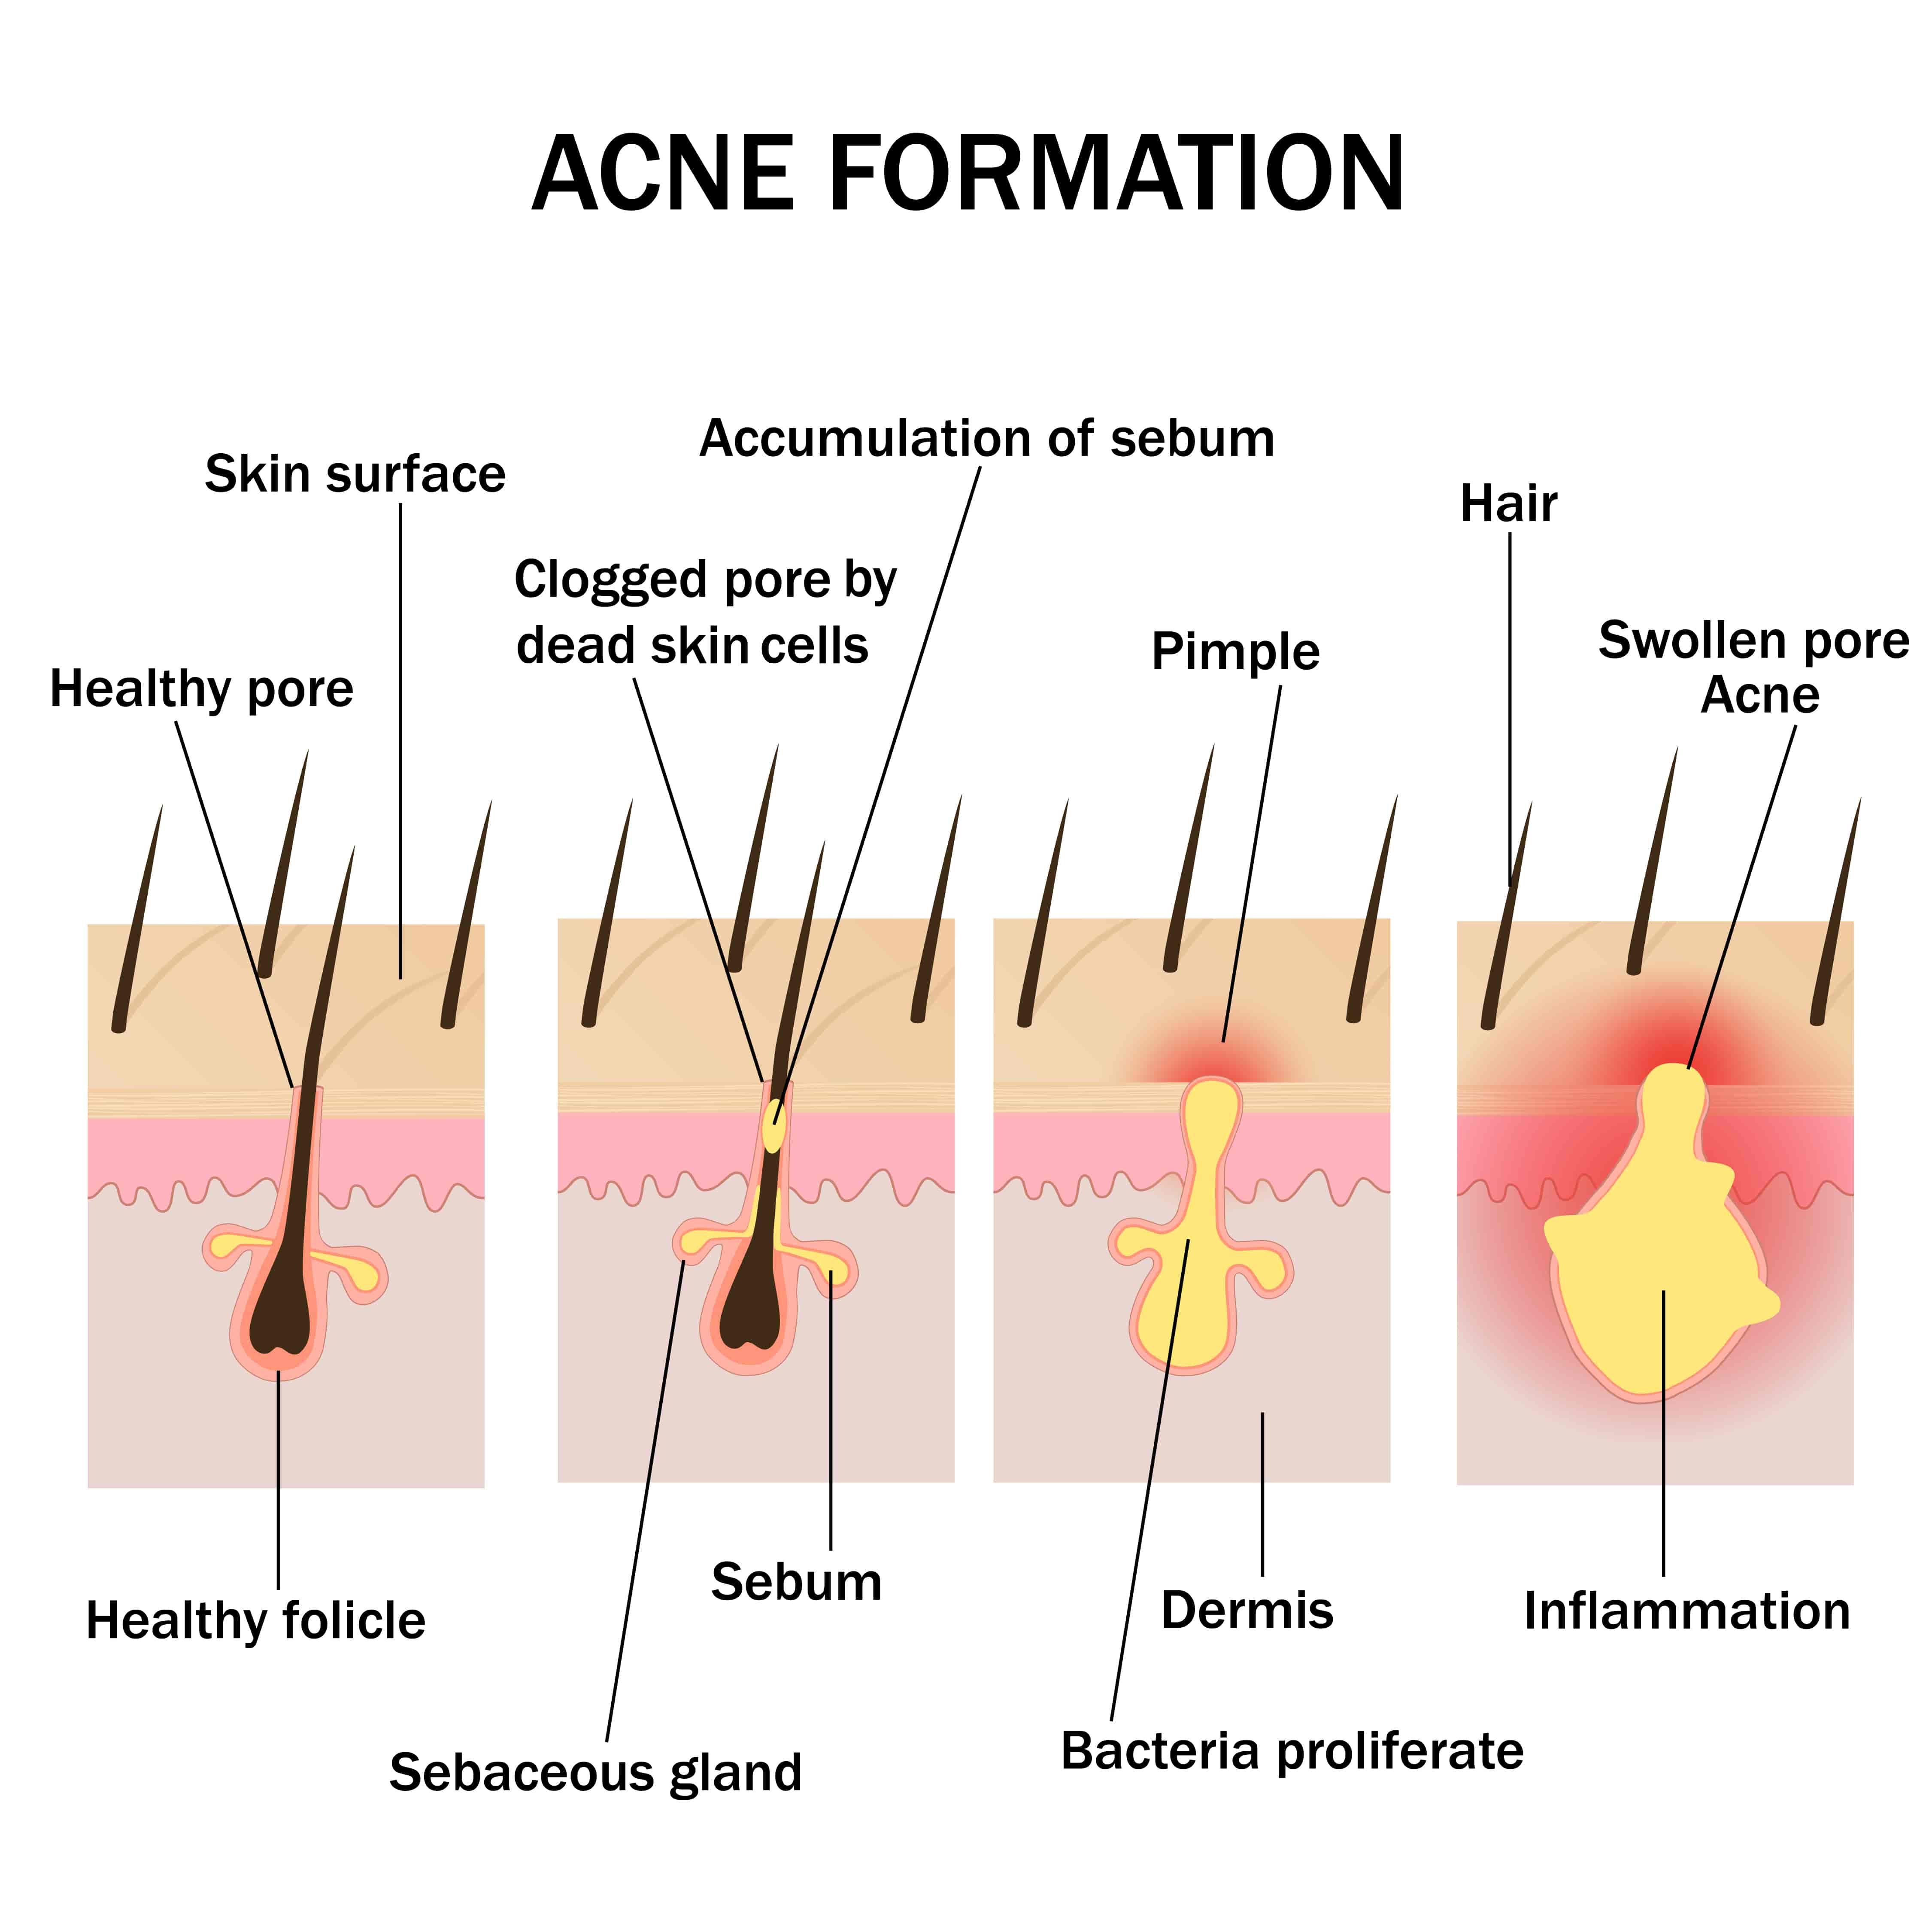 Got Acne? Learn How an Infrared Sauna Can Help Maintain Your Skin - JNH  Lifestyles Australia